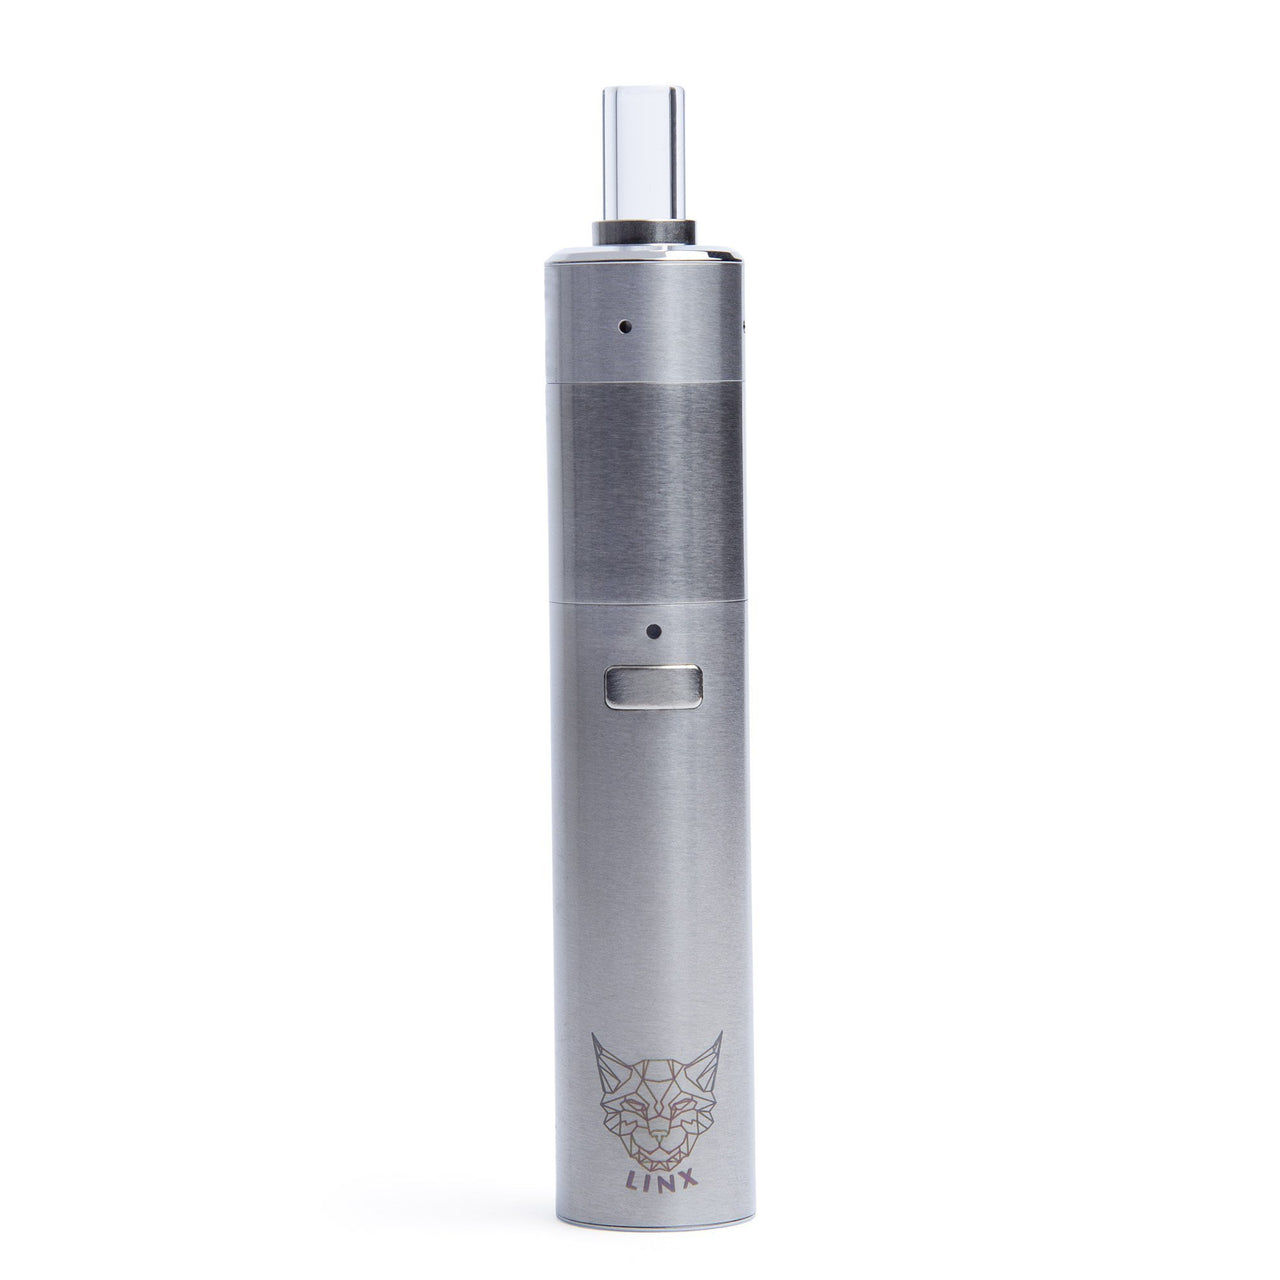 LINX Blaze XL Chamber Dab Pen - 420 Science - The most trusted online smoke shop.